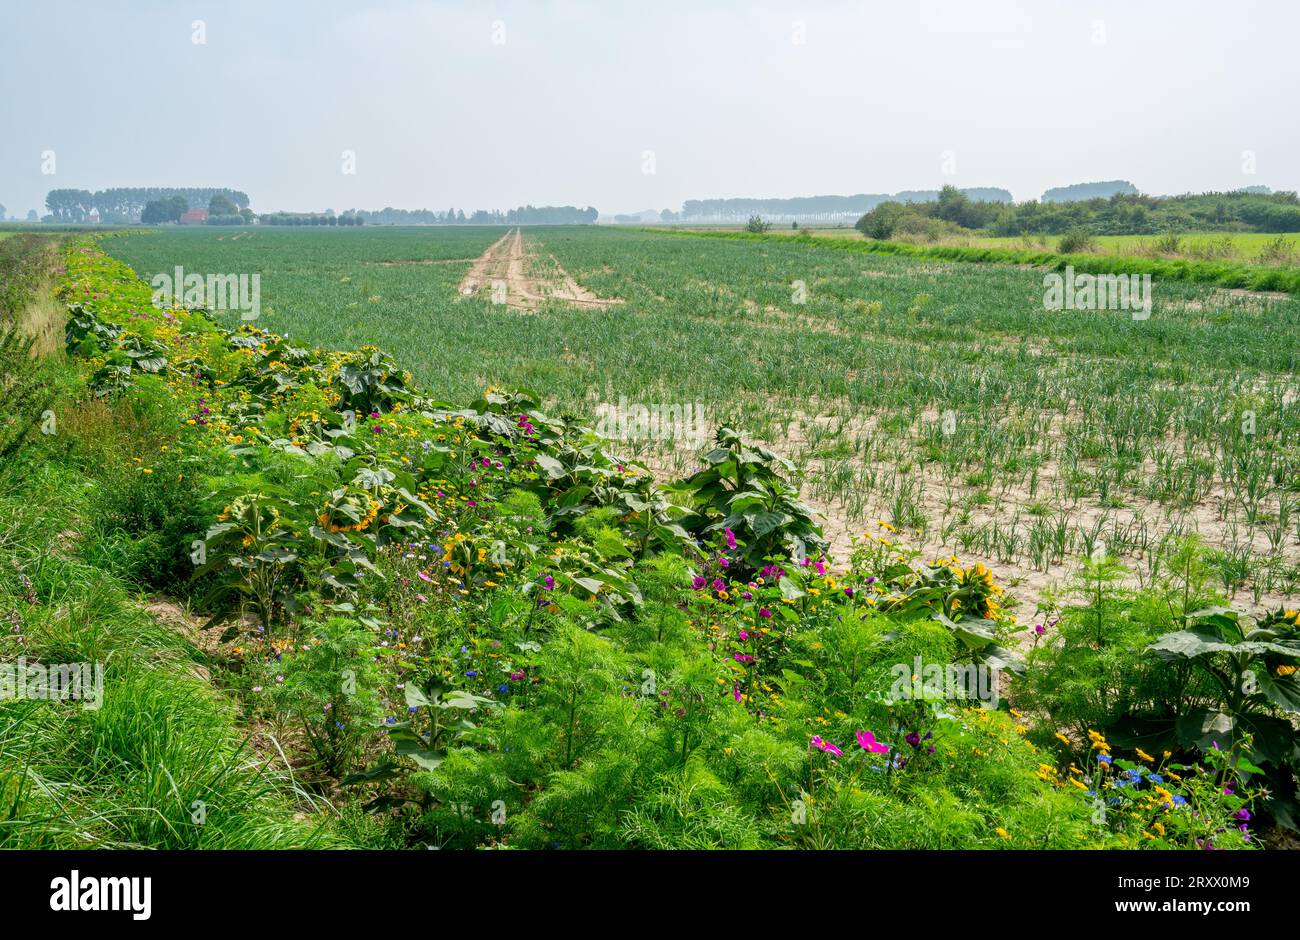 Onion field with border of various kinds of flowers to improve biodiversity Stock Photo